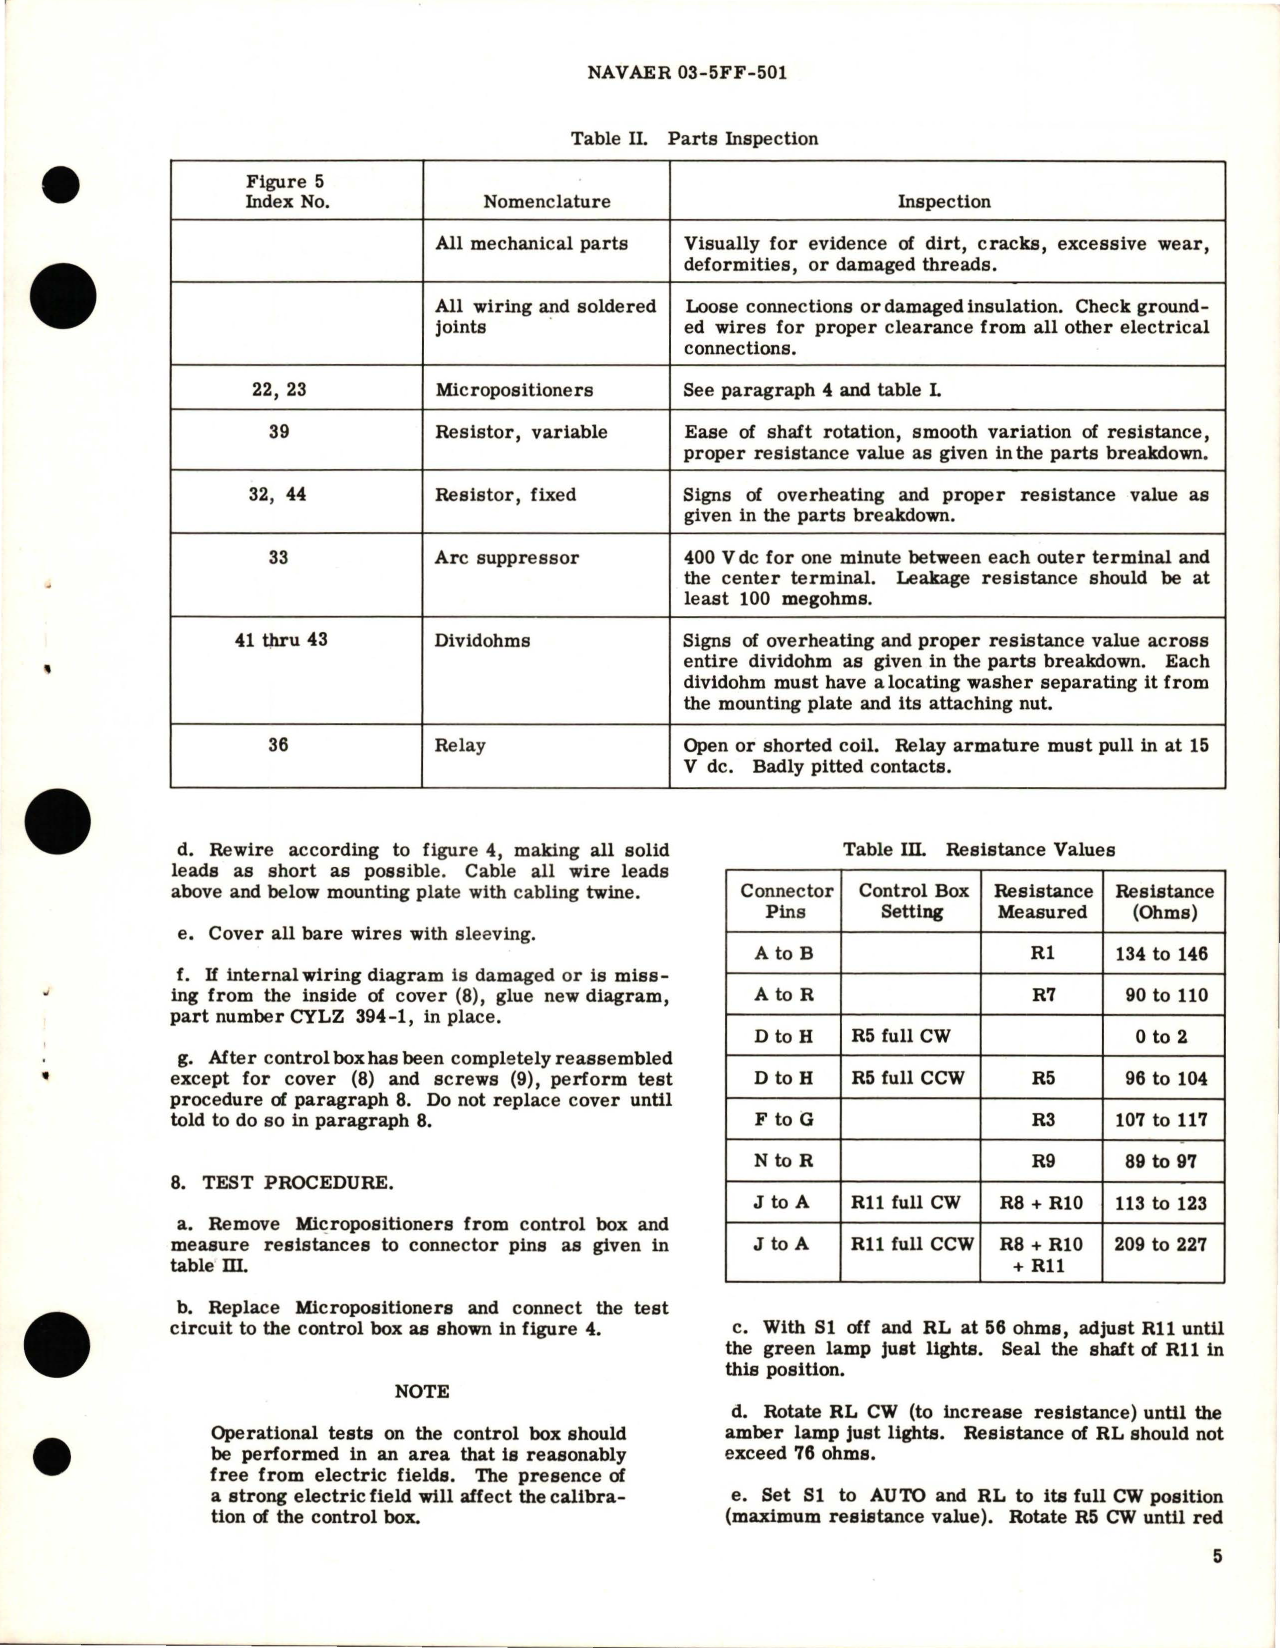 Sample page 5 from AirCorps Library document: Overhaul Instructions with Parts Breakdown for Cockpit Temperature Control Box - CYLZ 2872-1